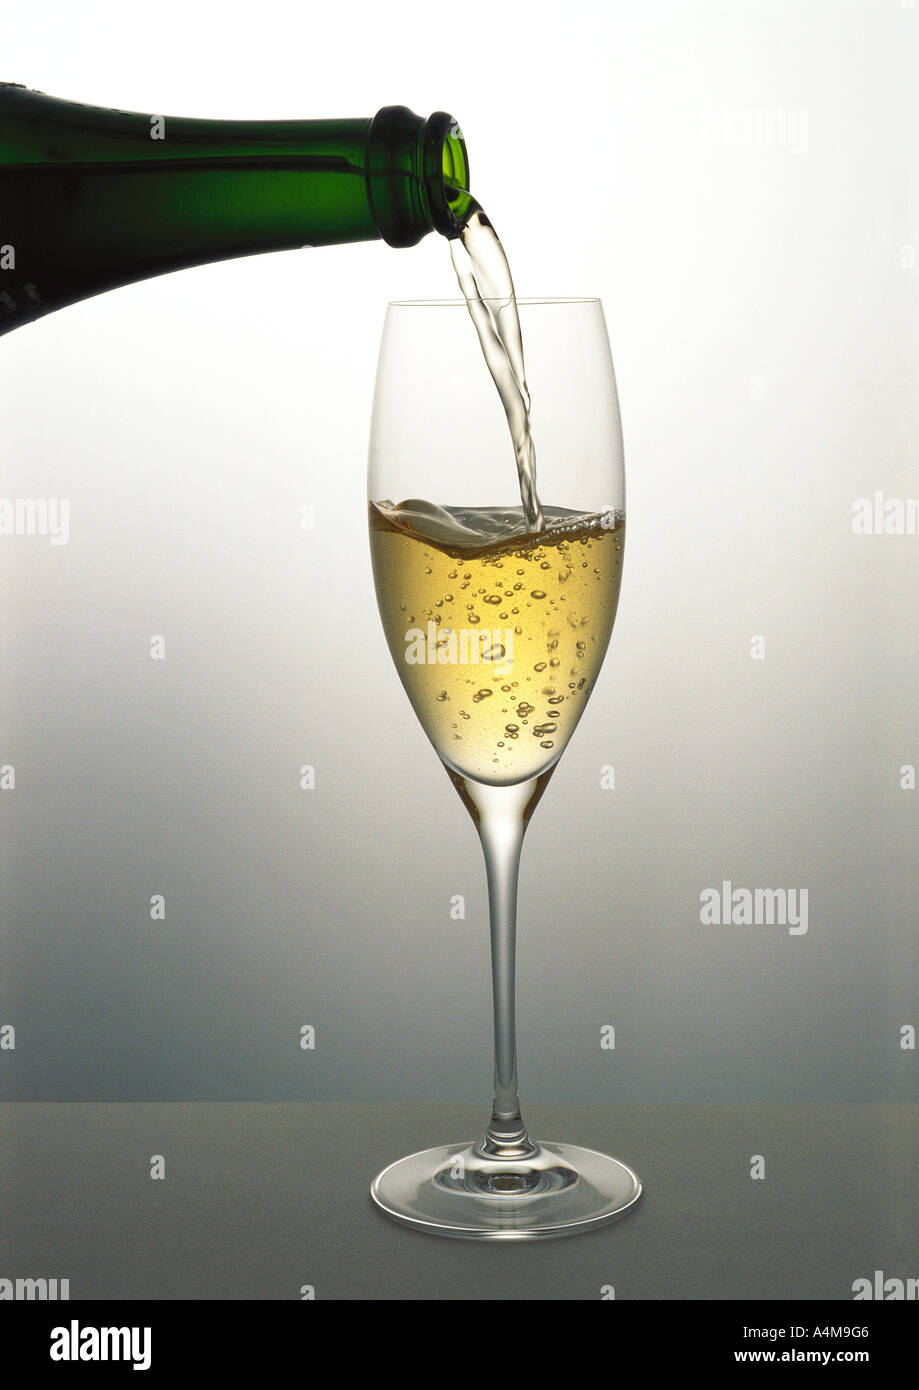 Pouring a glass of Champagne Stock Photo